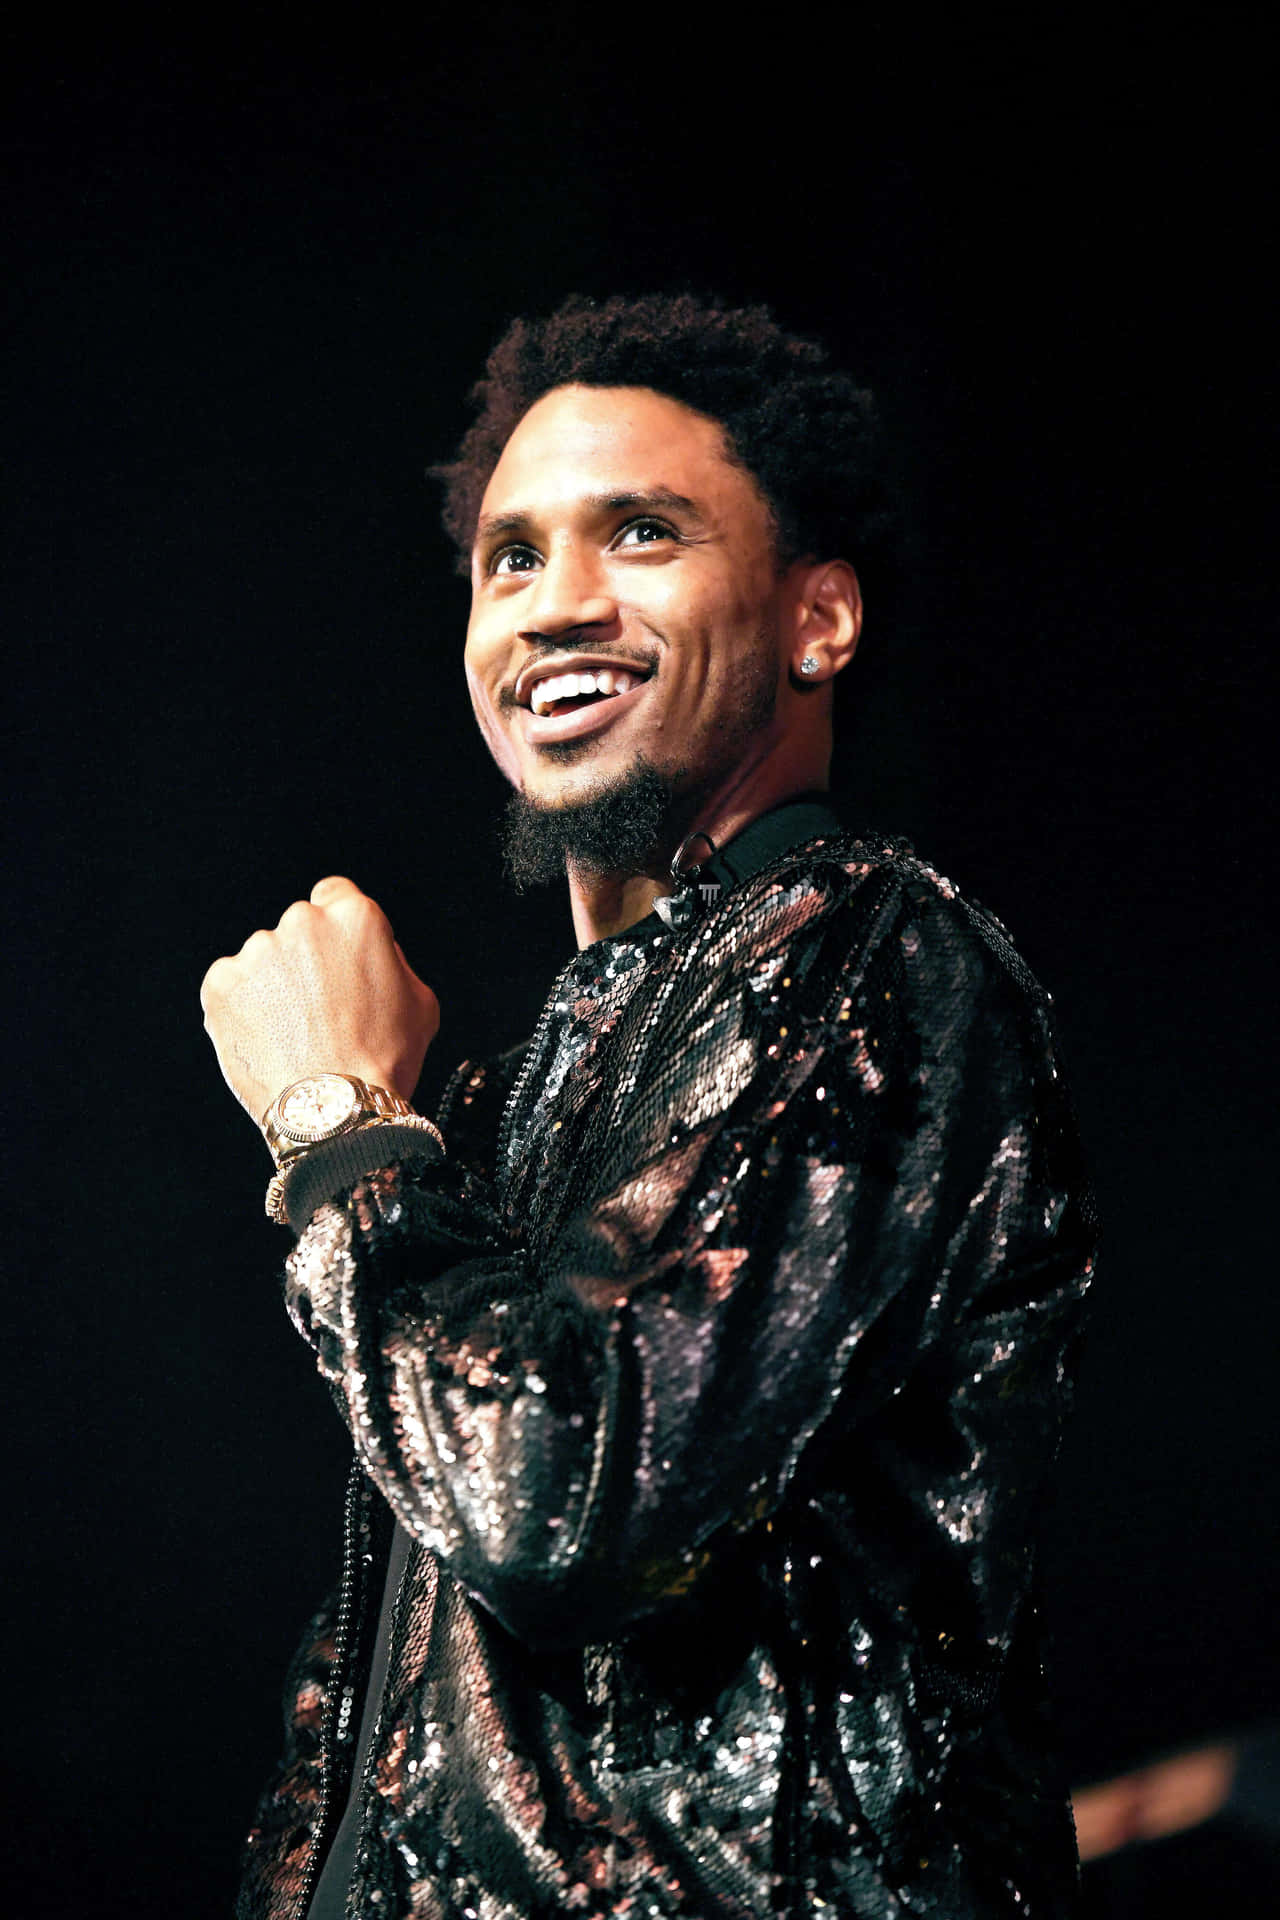 Treysongz - Gör Musik På Sitt Eget Sätt. (when Referring To Computer/mobile Wallpaper, The Translation Would Be The Same As In Any Other Context) Wallpaper